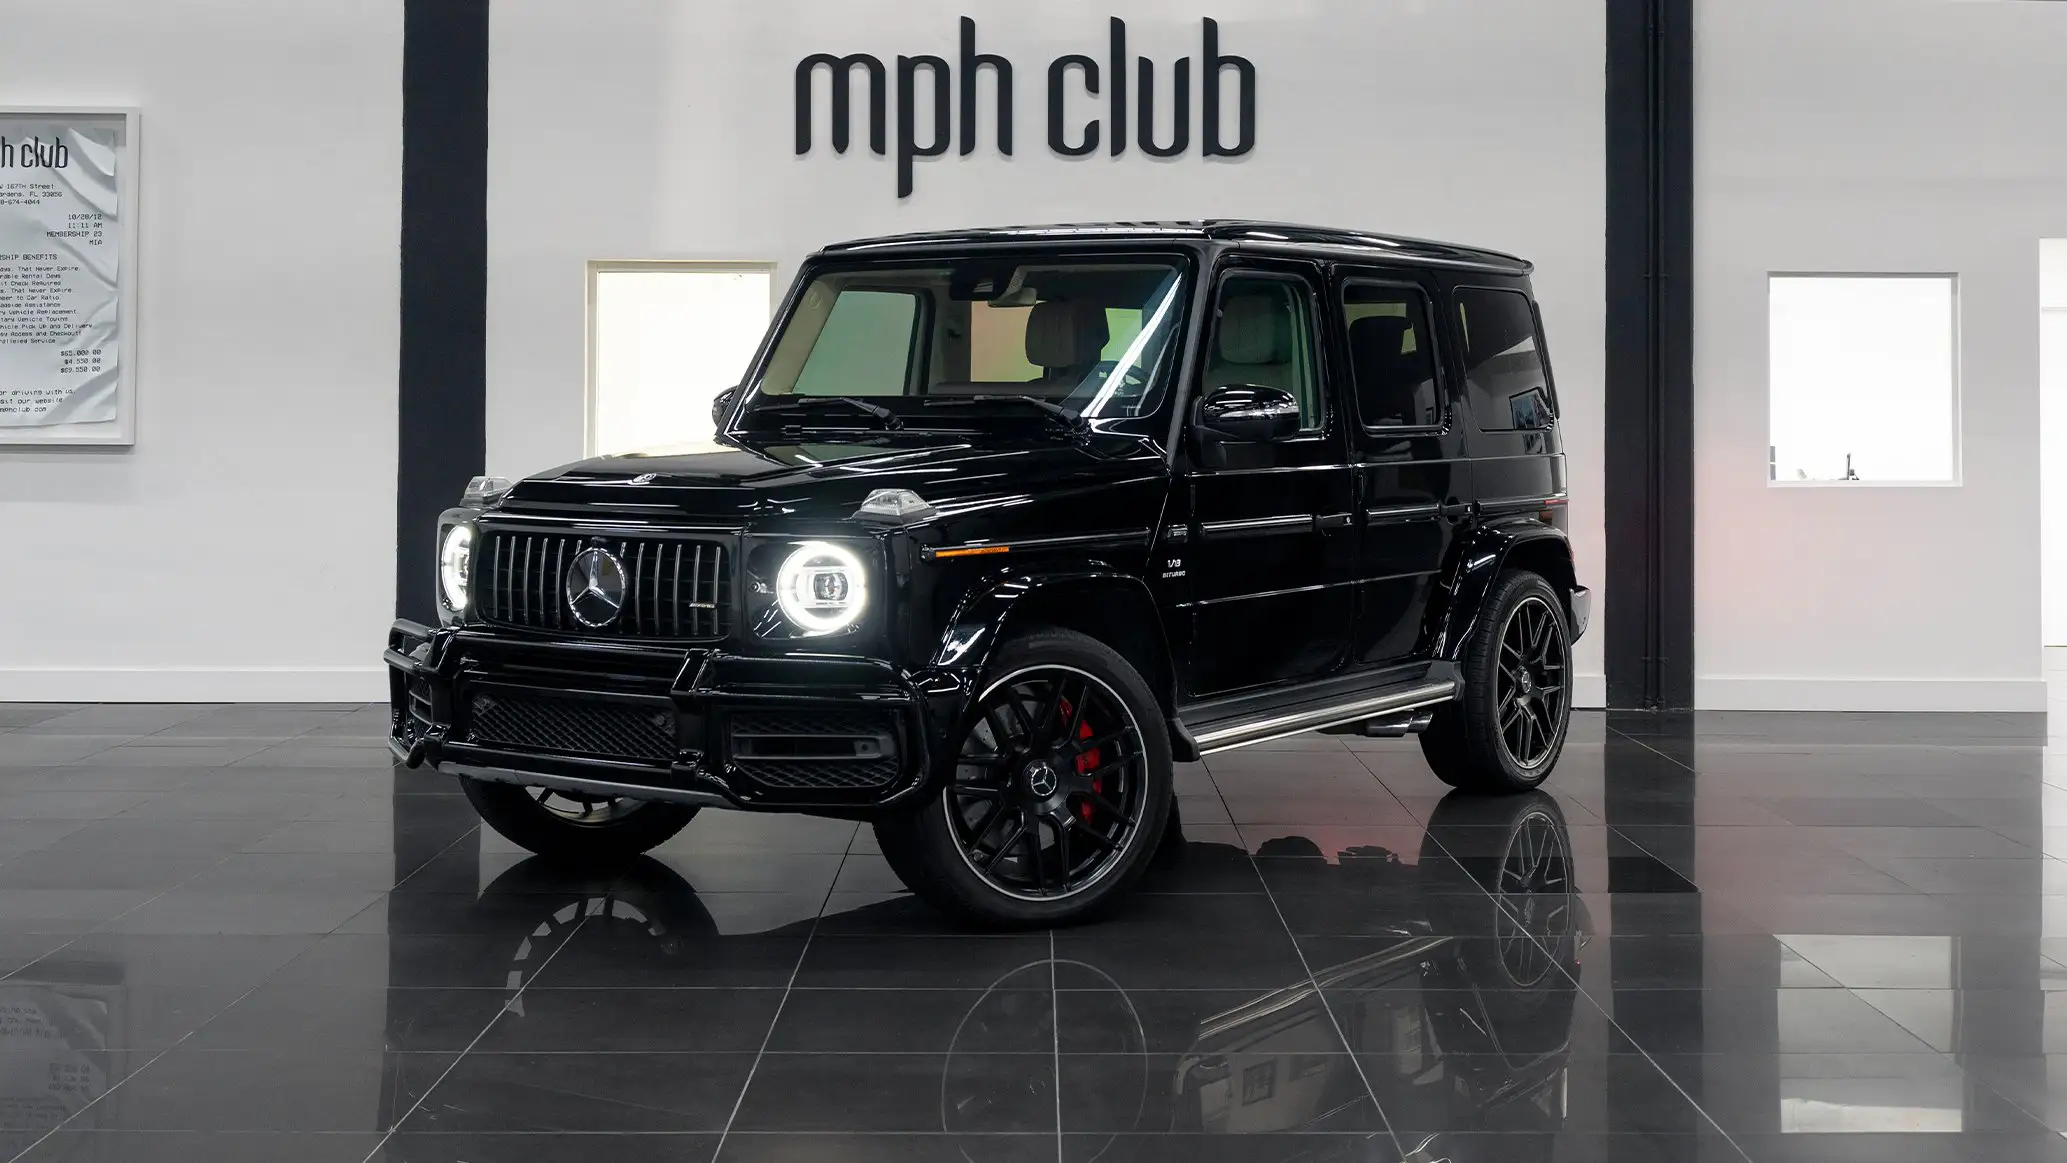 2020 black on white mercedes benz amg g63 for sale mph club 0